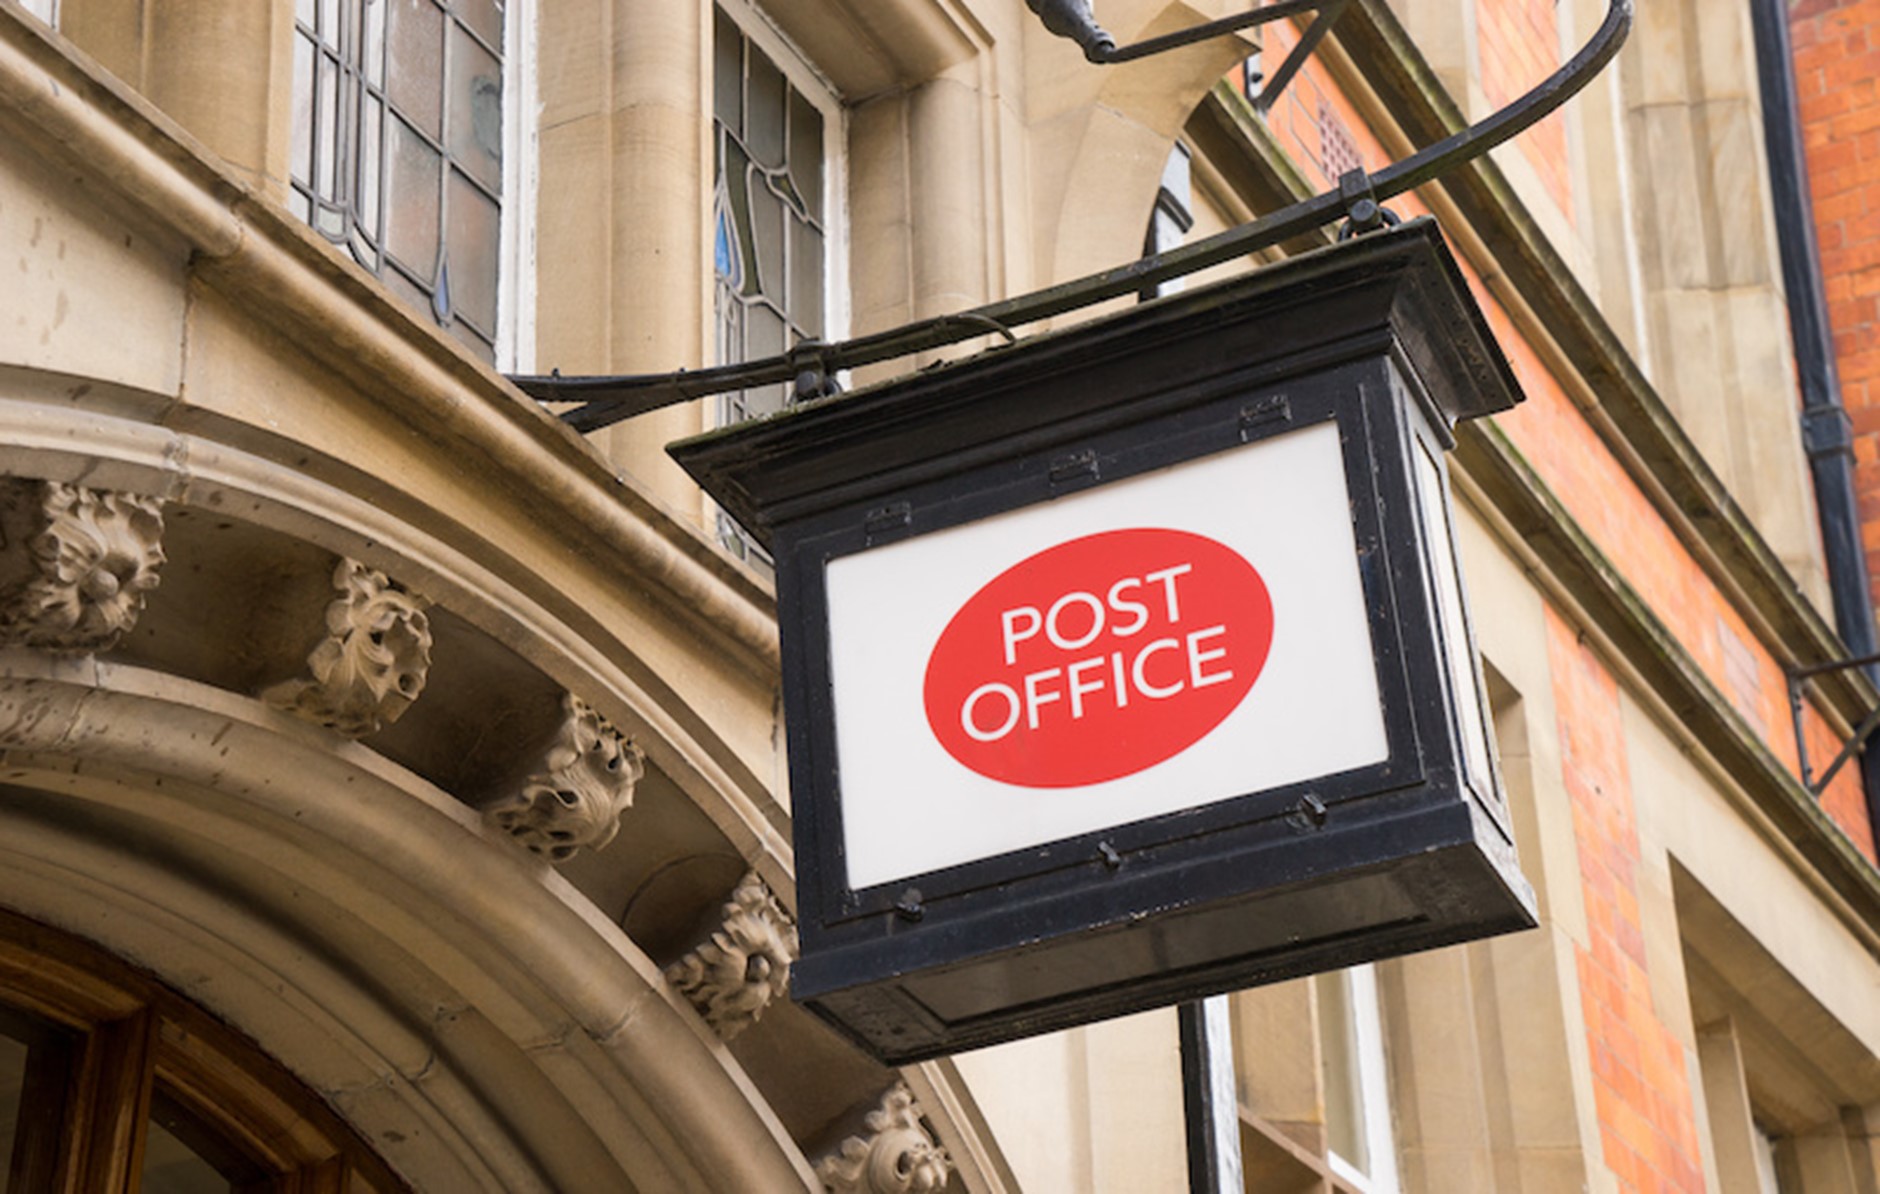 John Szepietowski discusses whether the Post Office could sue its former directors and advisers in relation to the Horizon scandal.